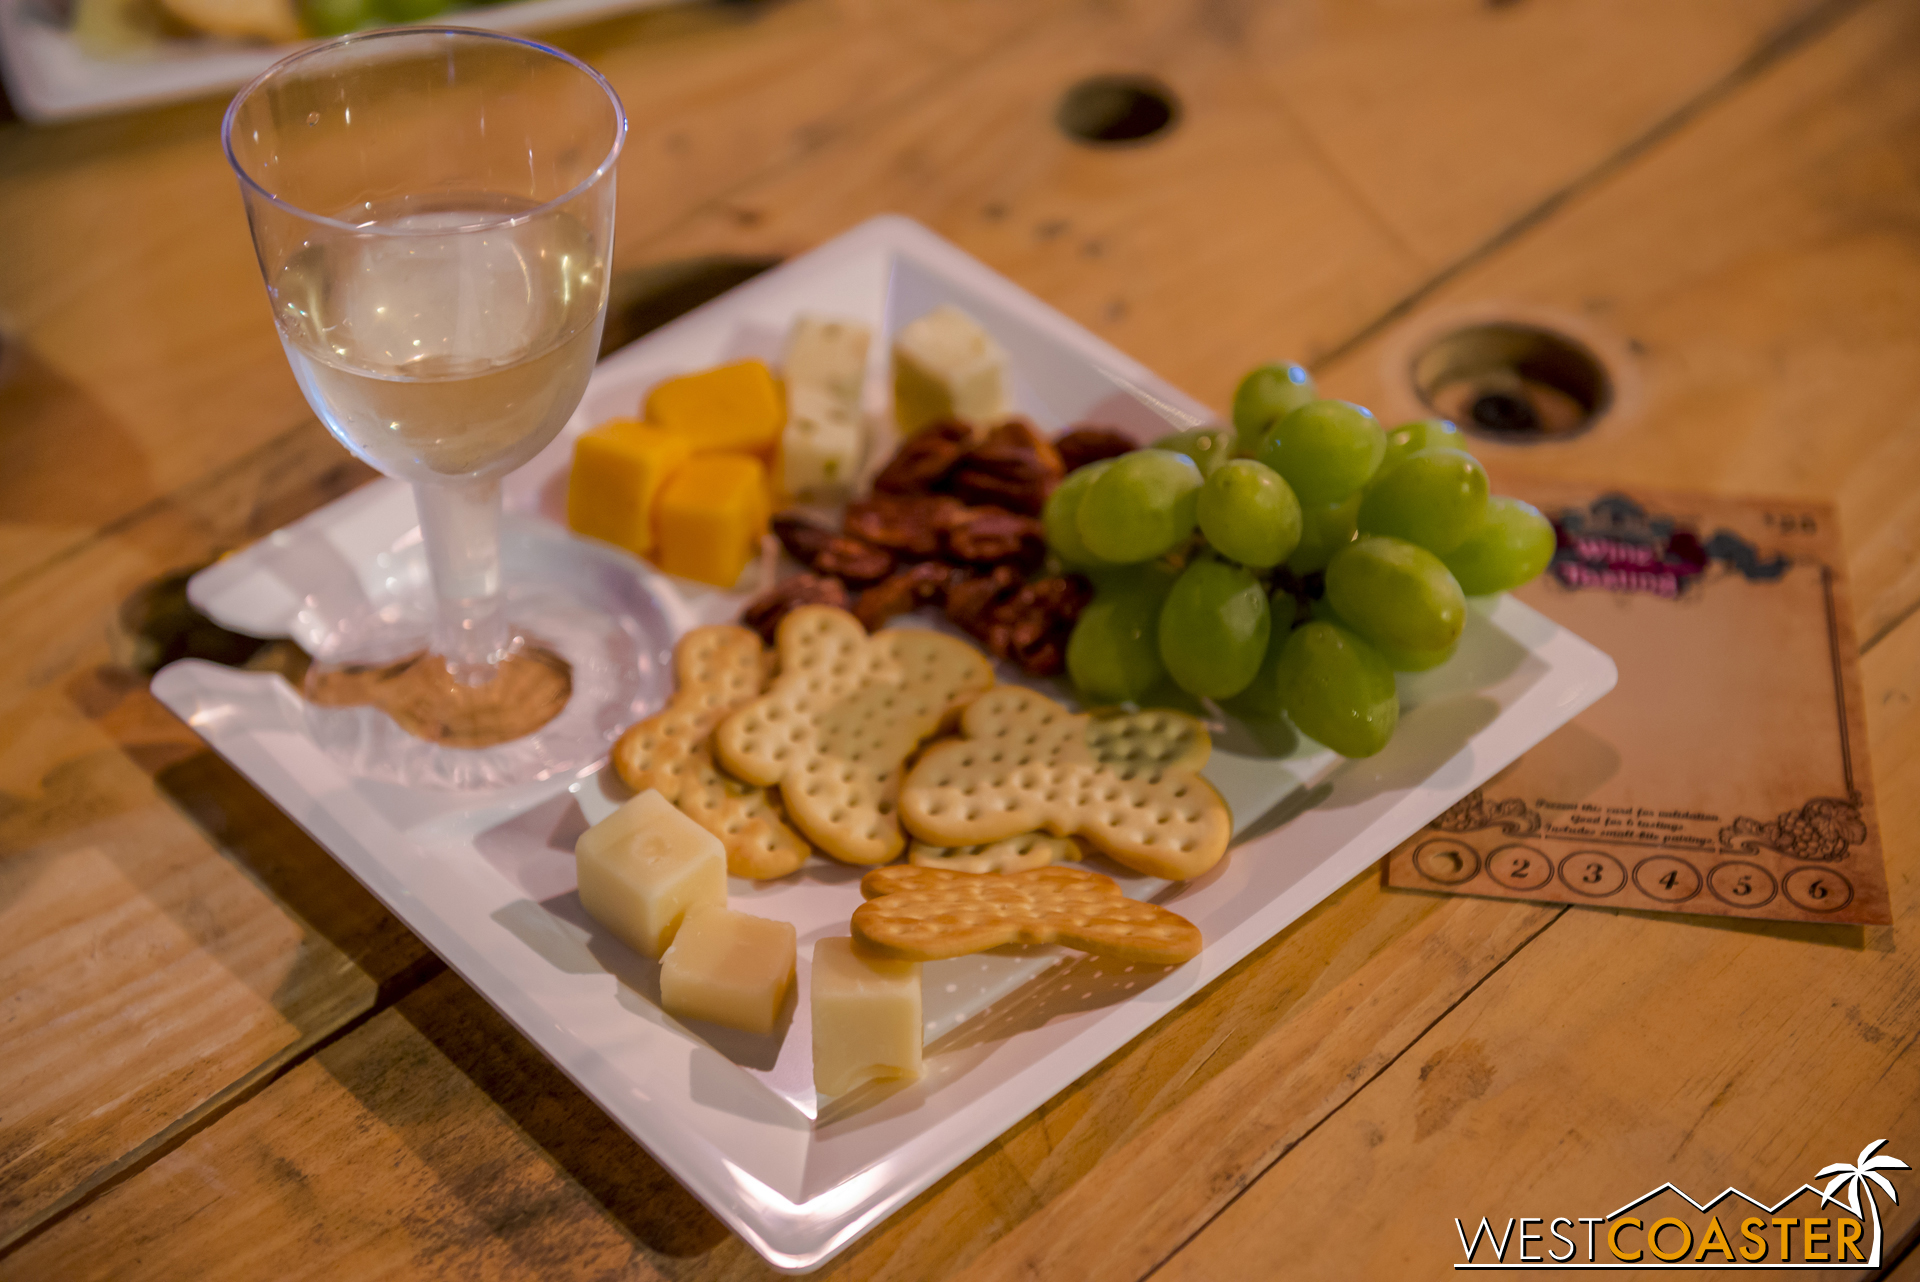  Complementary tasting tray.&nbsp; Overall, the wine here is an enjoyable, generally good selection.&nbsp; Nothing amazing, but good quality for the general populace, with enough quality that snobs should also enjoy things. 